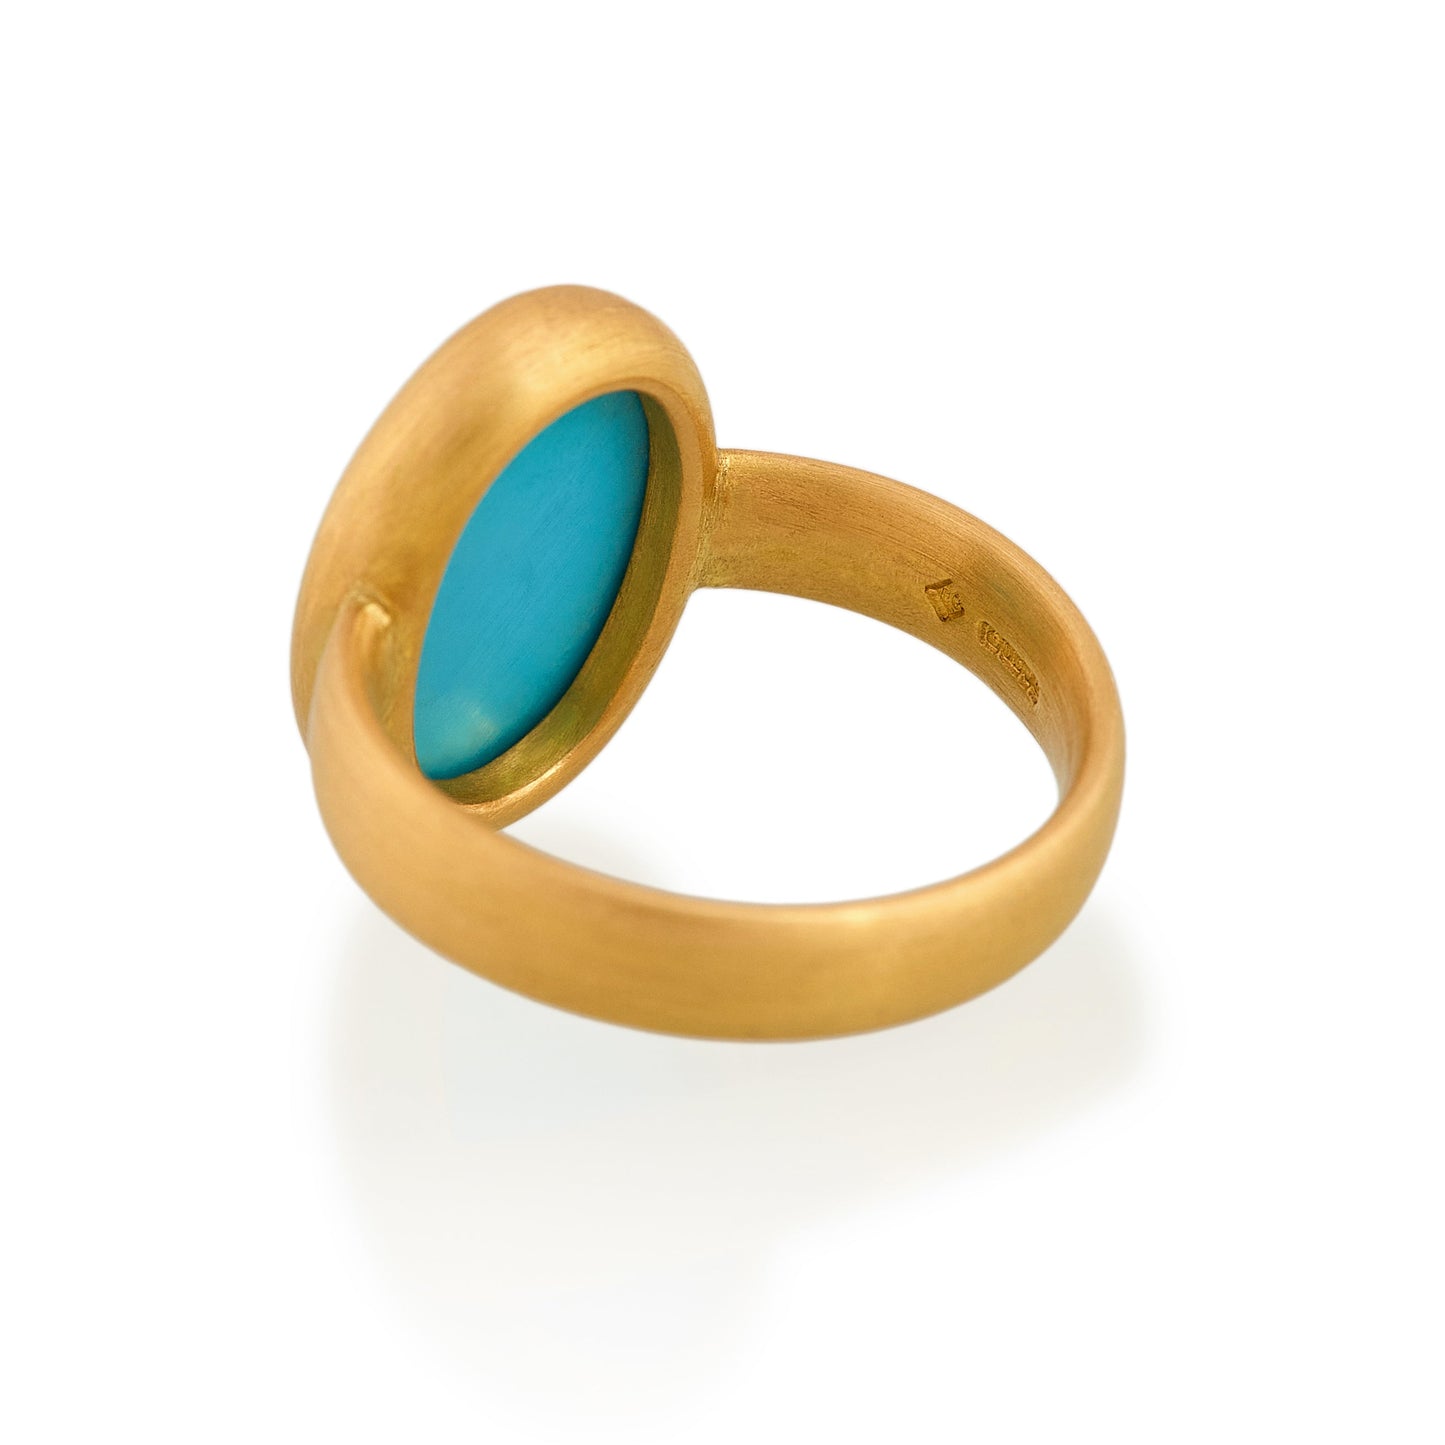 Oval Turquoise Ring, 22ct Gold